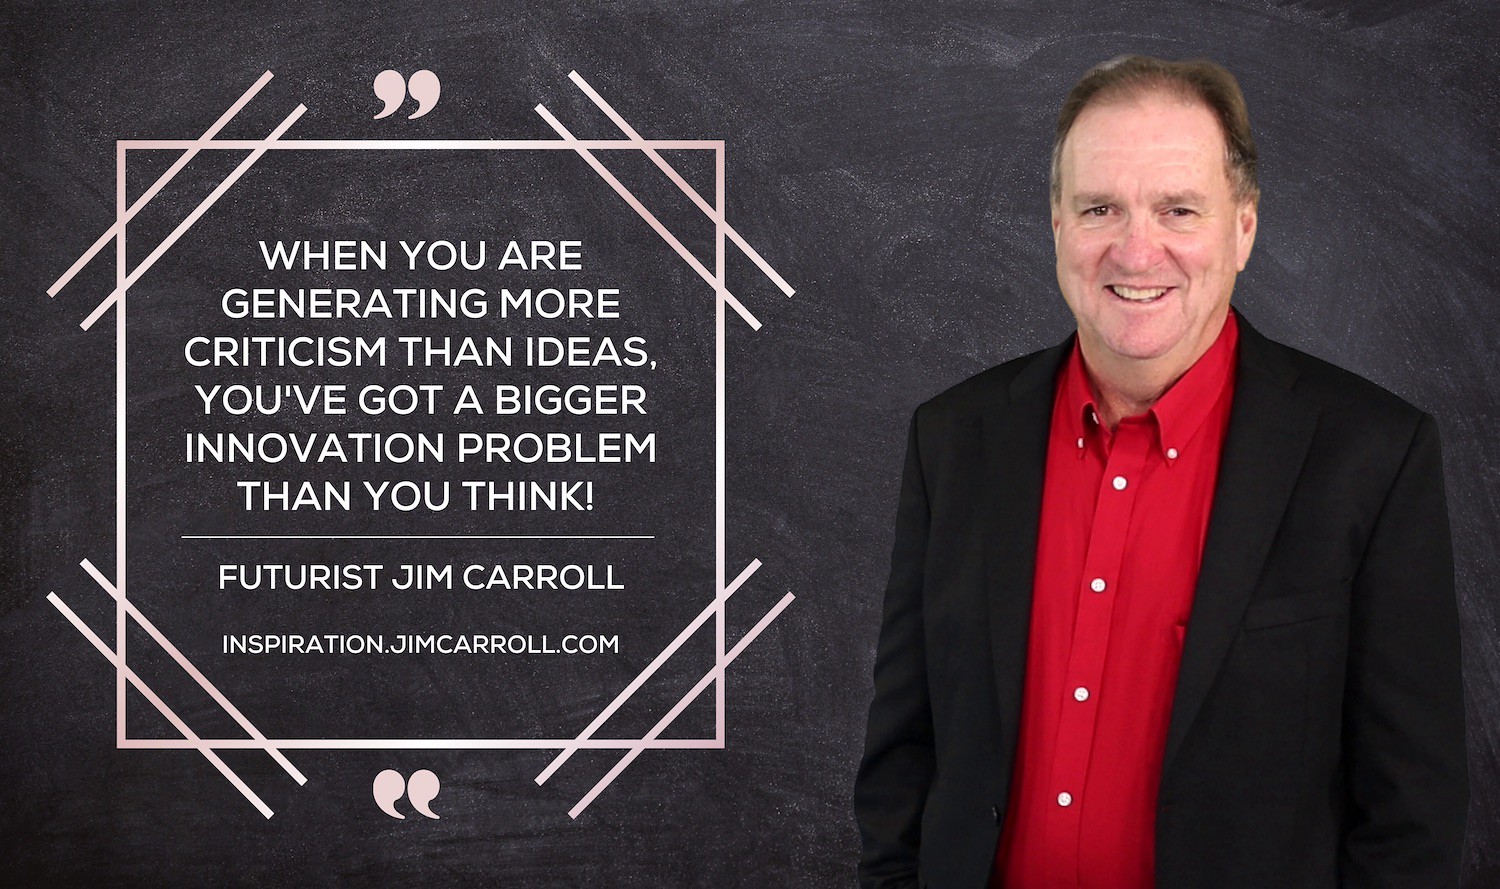 "When you are generating more criticism than ideas, you've got a bigger innovation problem than you think!" - Futurist Jim Carroll